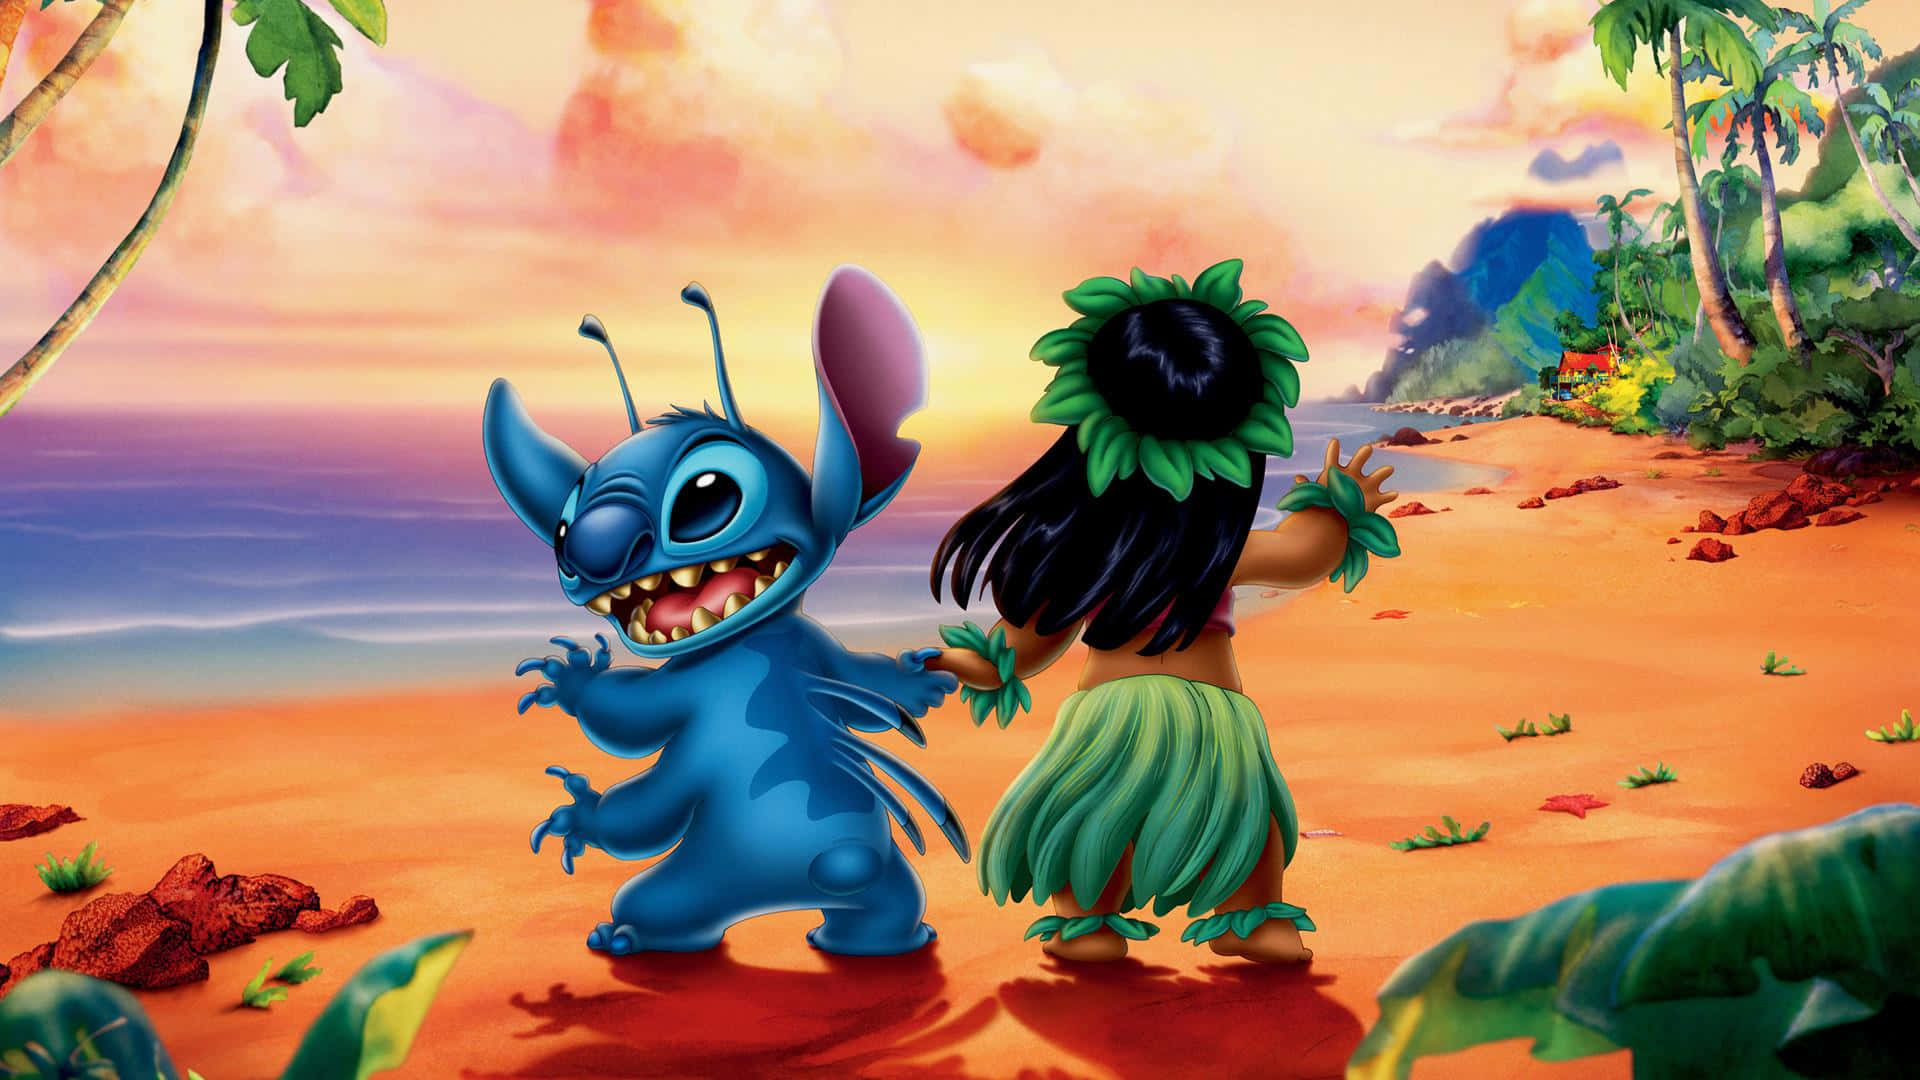 Adorable Stitch And Lilo Enjoying the Beach Wallpaper